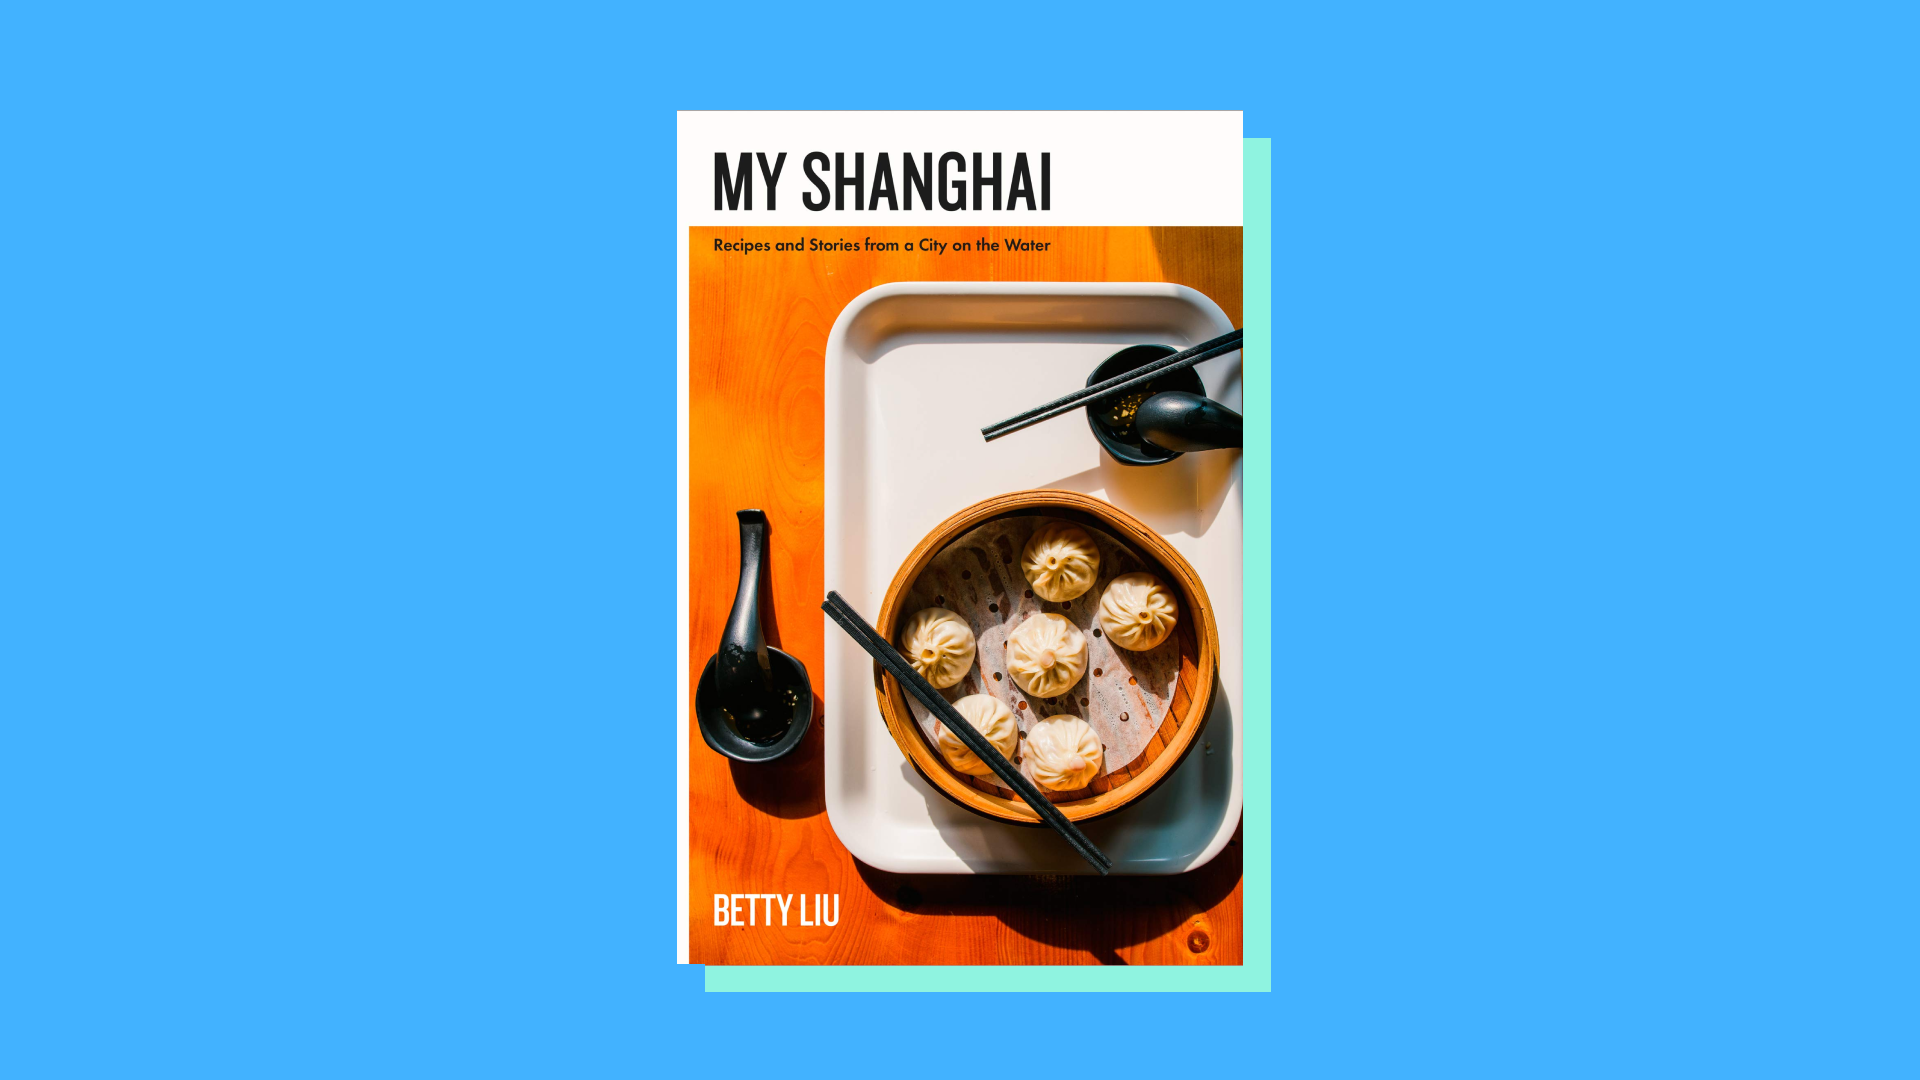 “My Shanghai: Recipes and Stories from a City on the Water” by Betty Liu